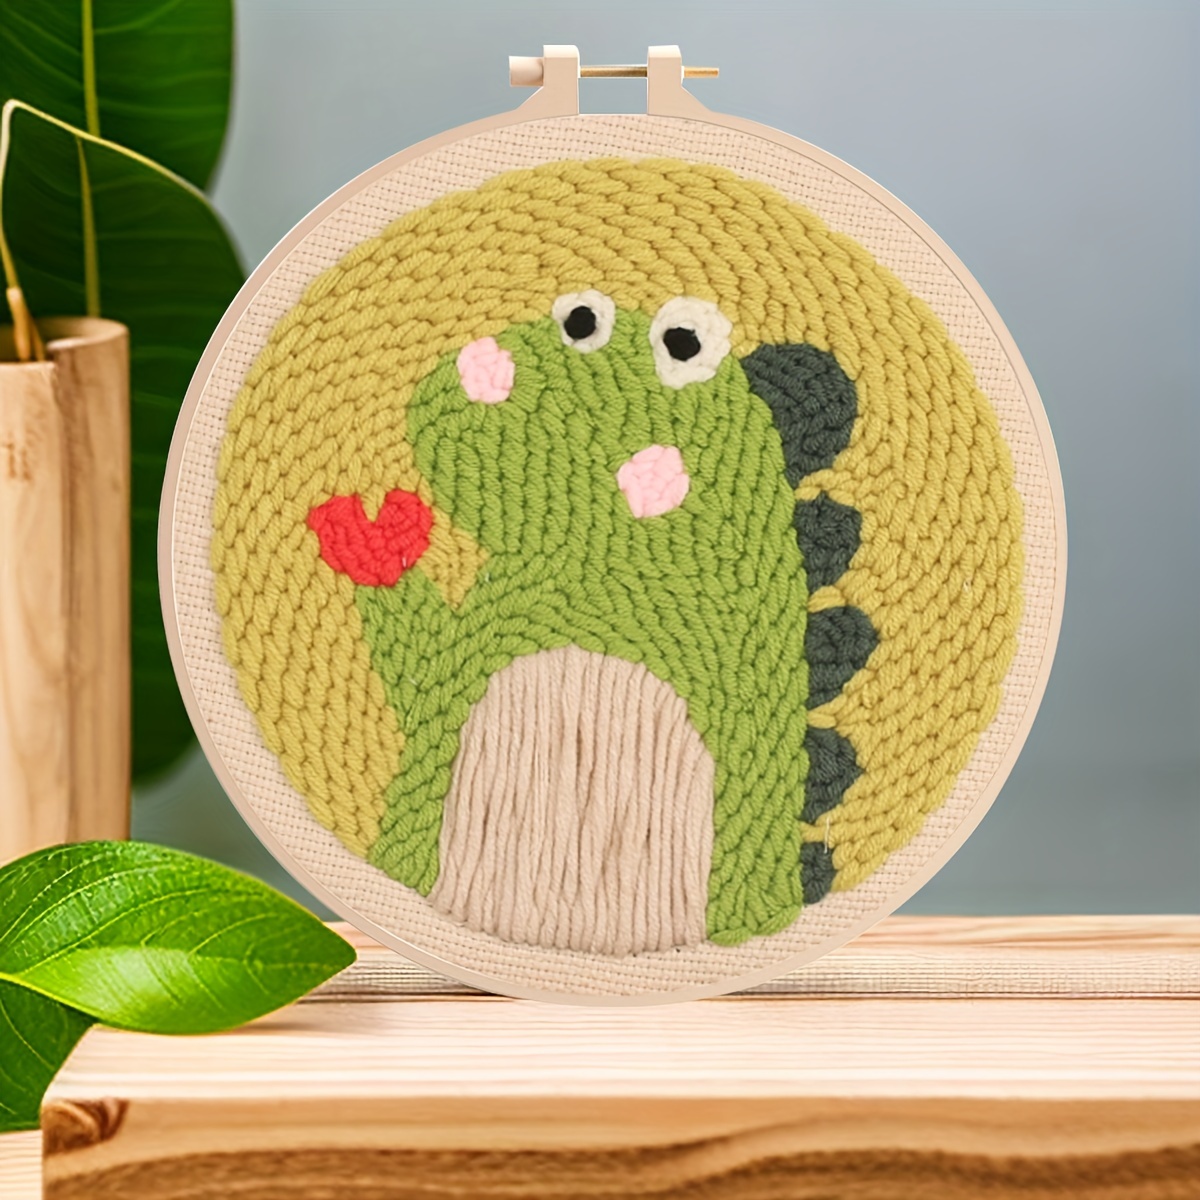 Buy DIY Punch Embroidery Kits for Adults Animal Pattern with